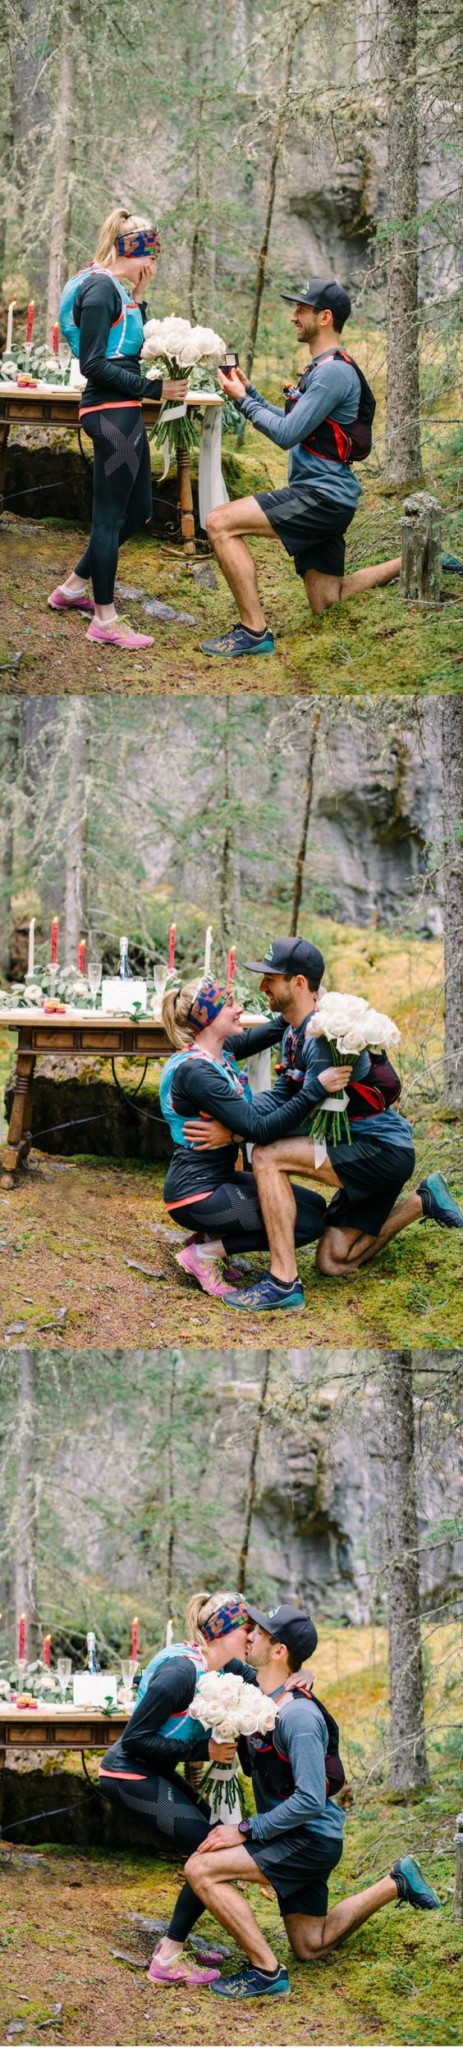 This hiking proposal is the most romantic thing we've seen!